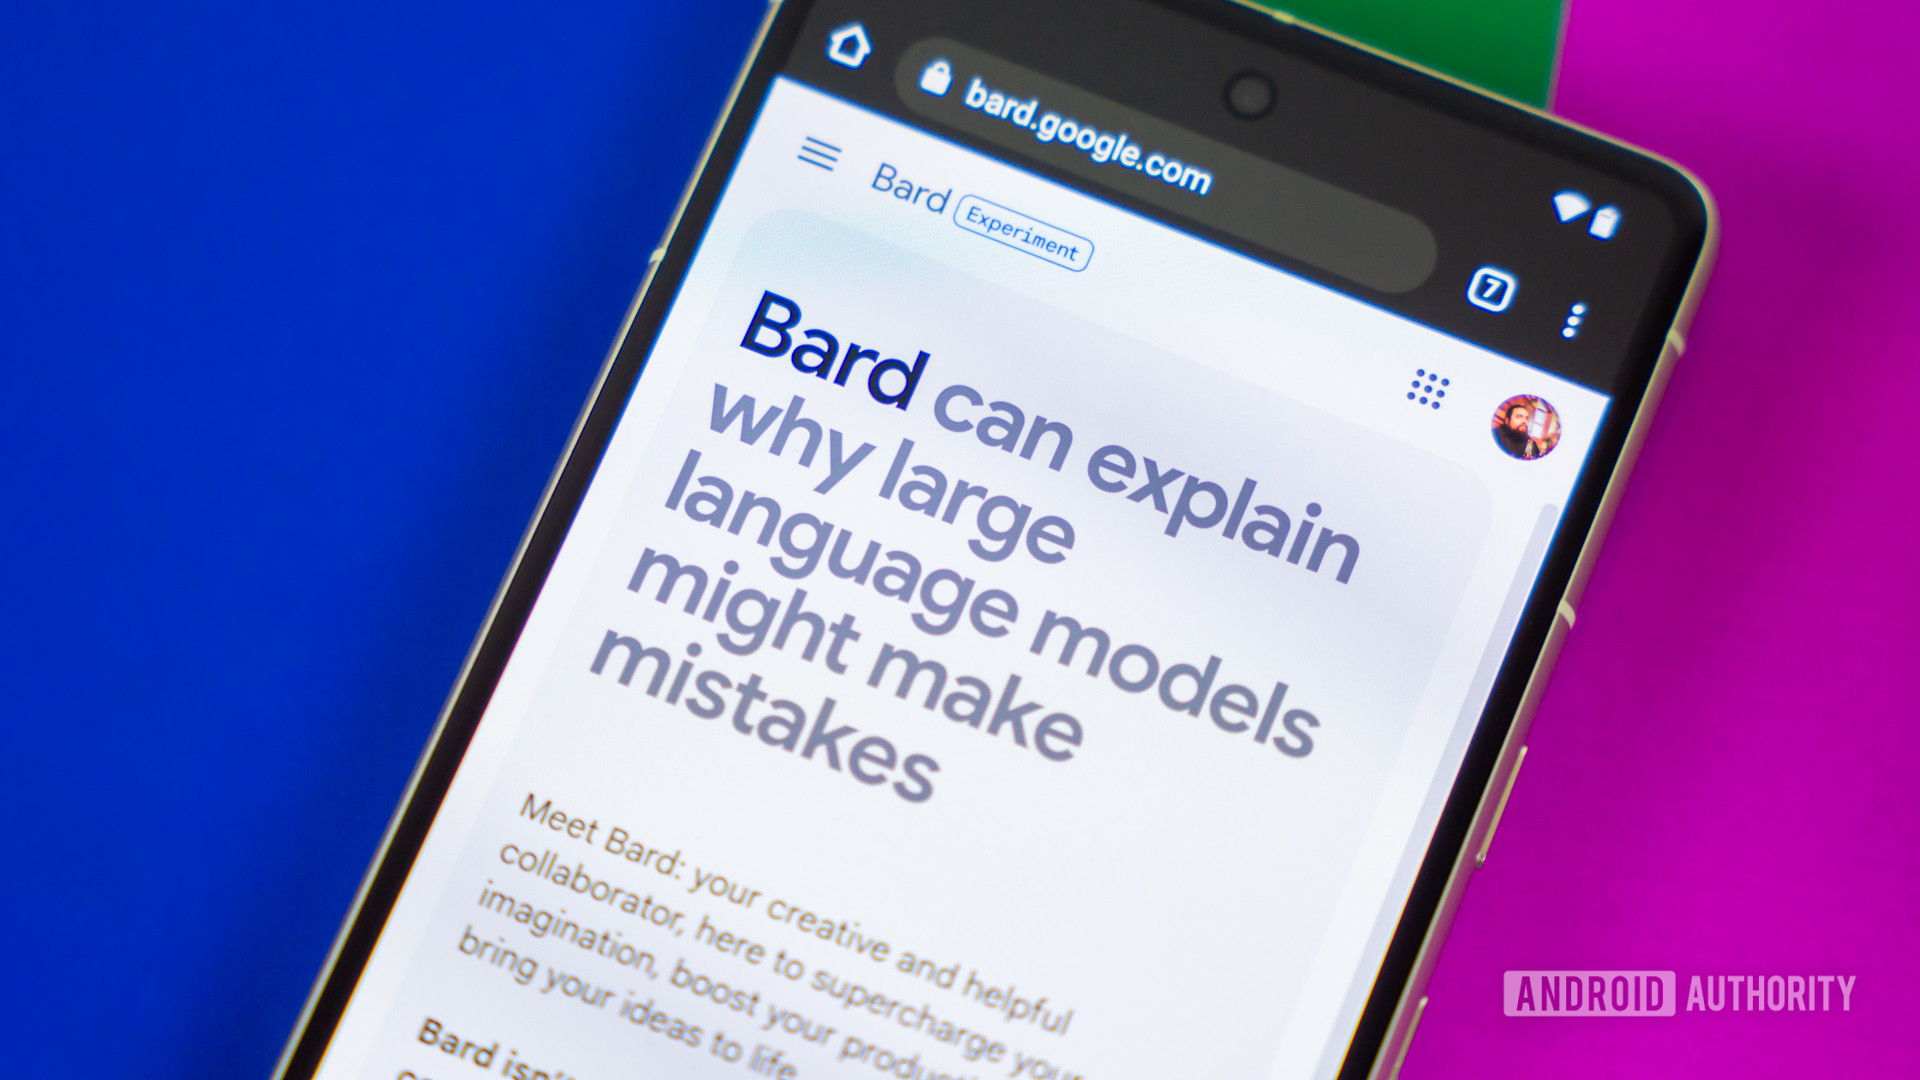 How to Use Google Bard AI: 10 Ways It Can Make Your Life Easier